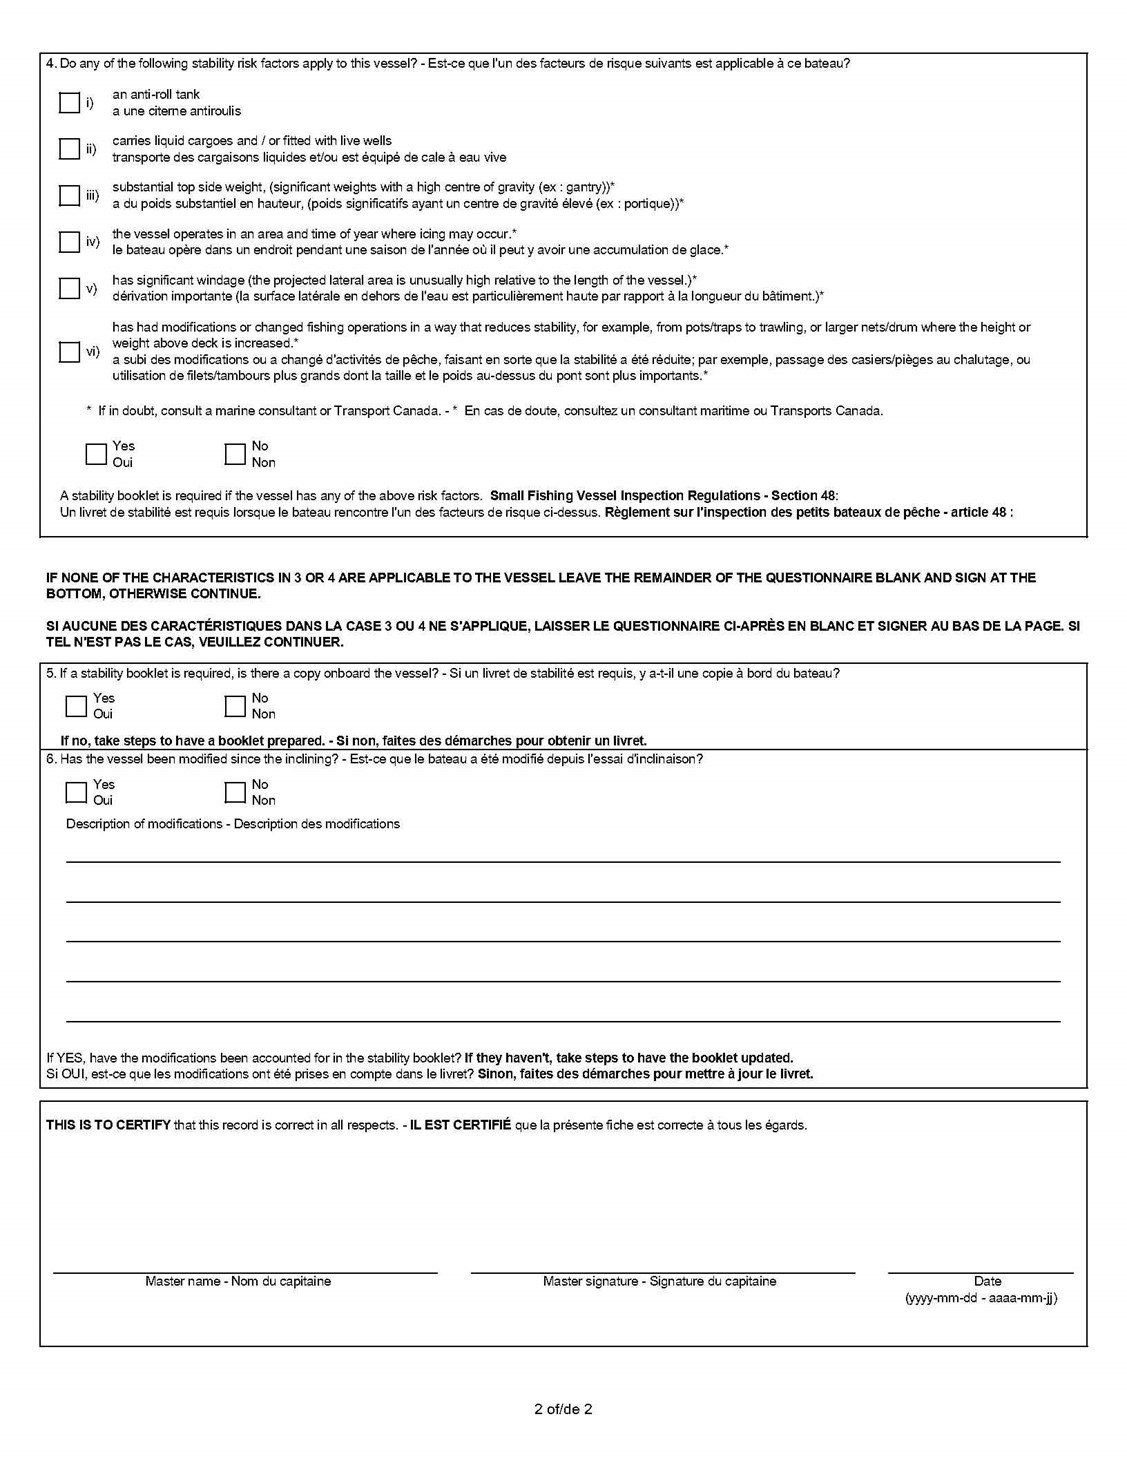 Stability questionnaire